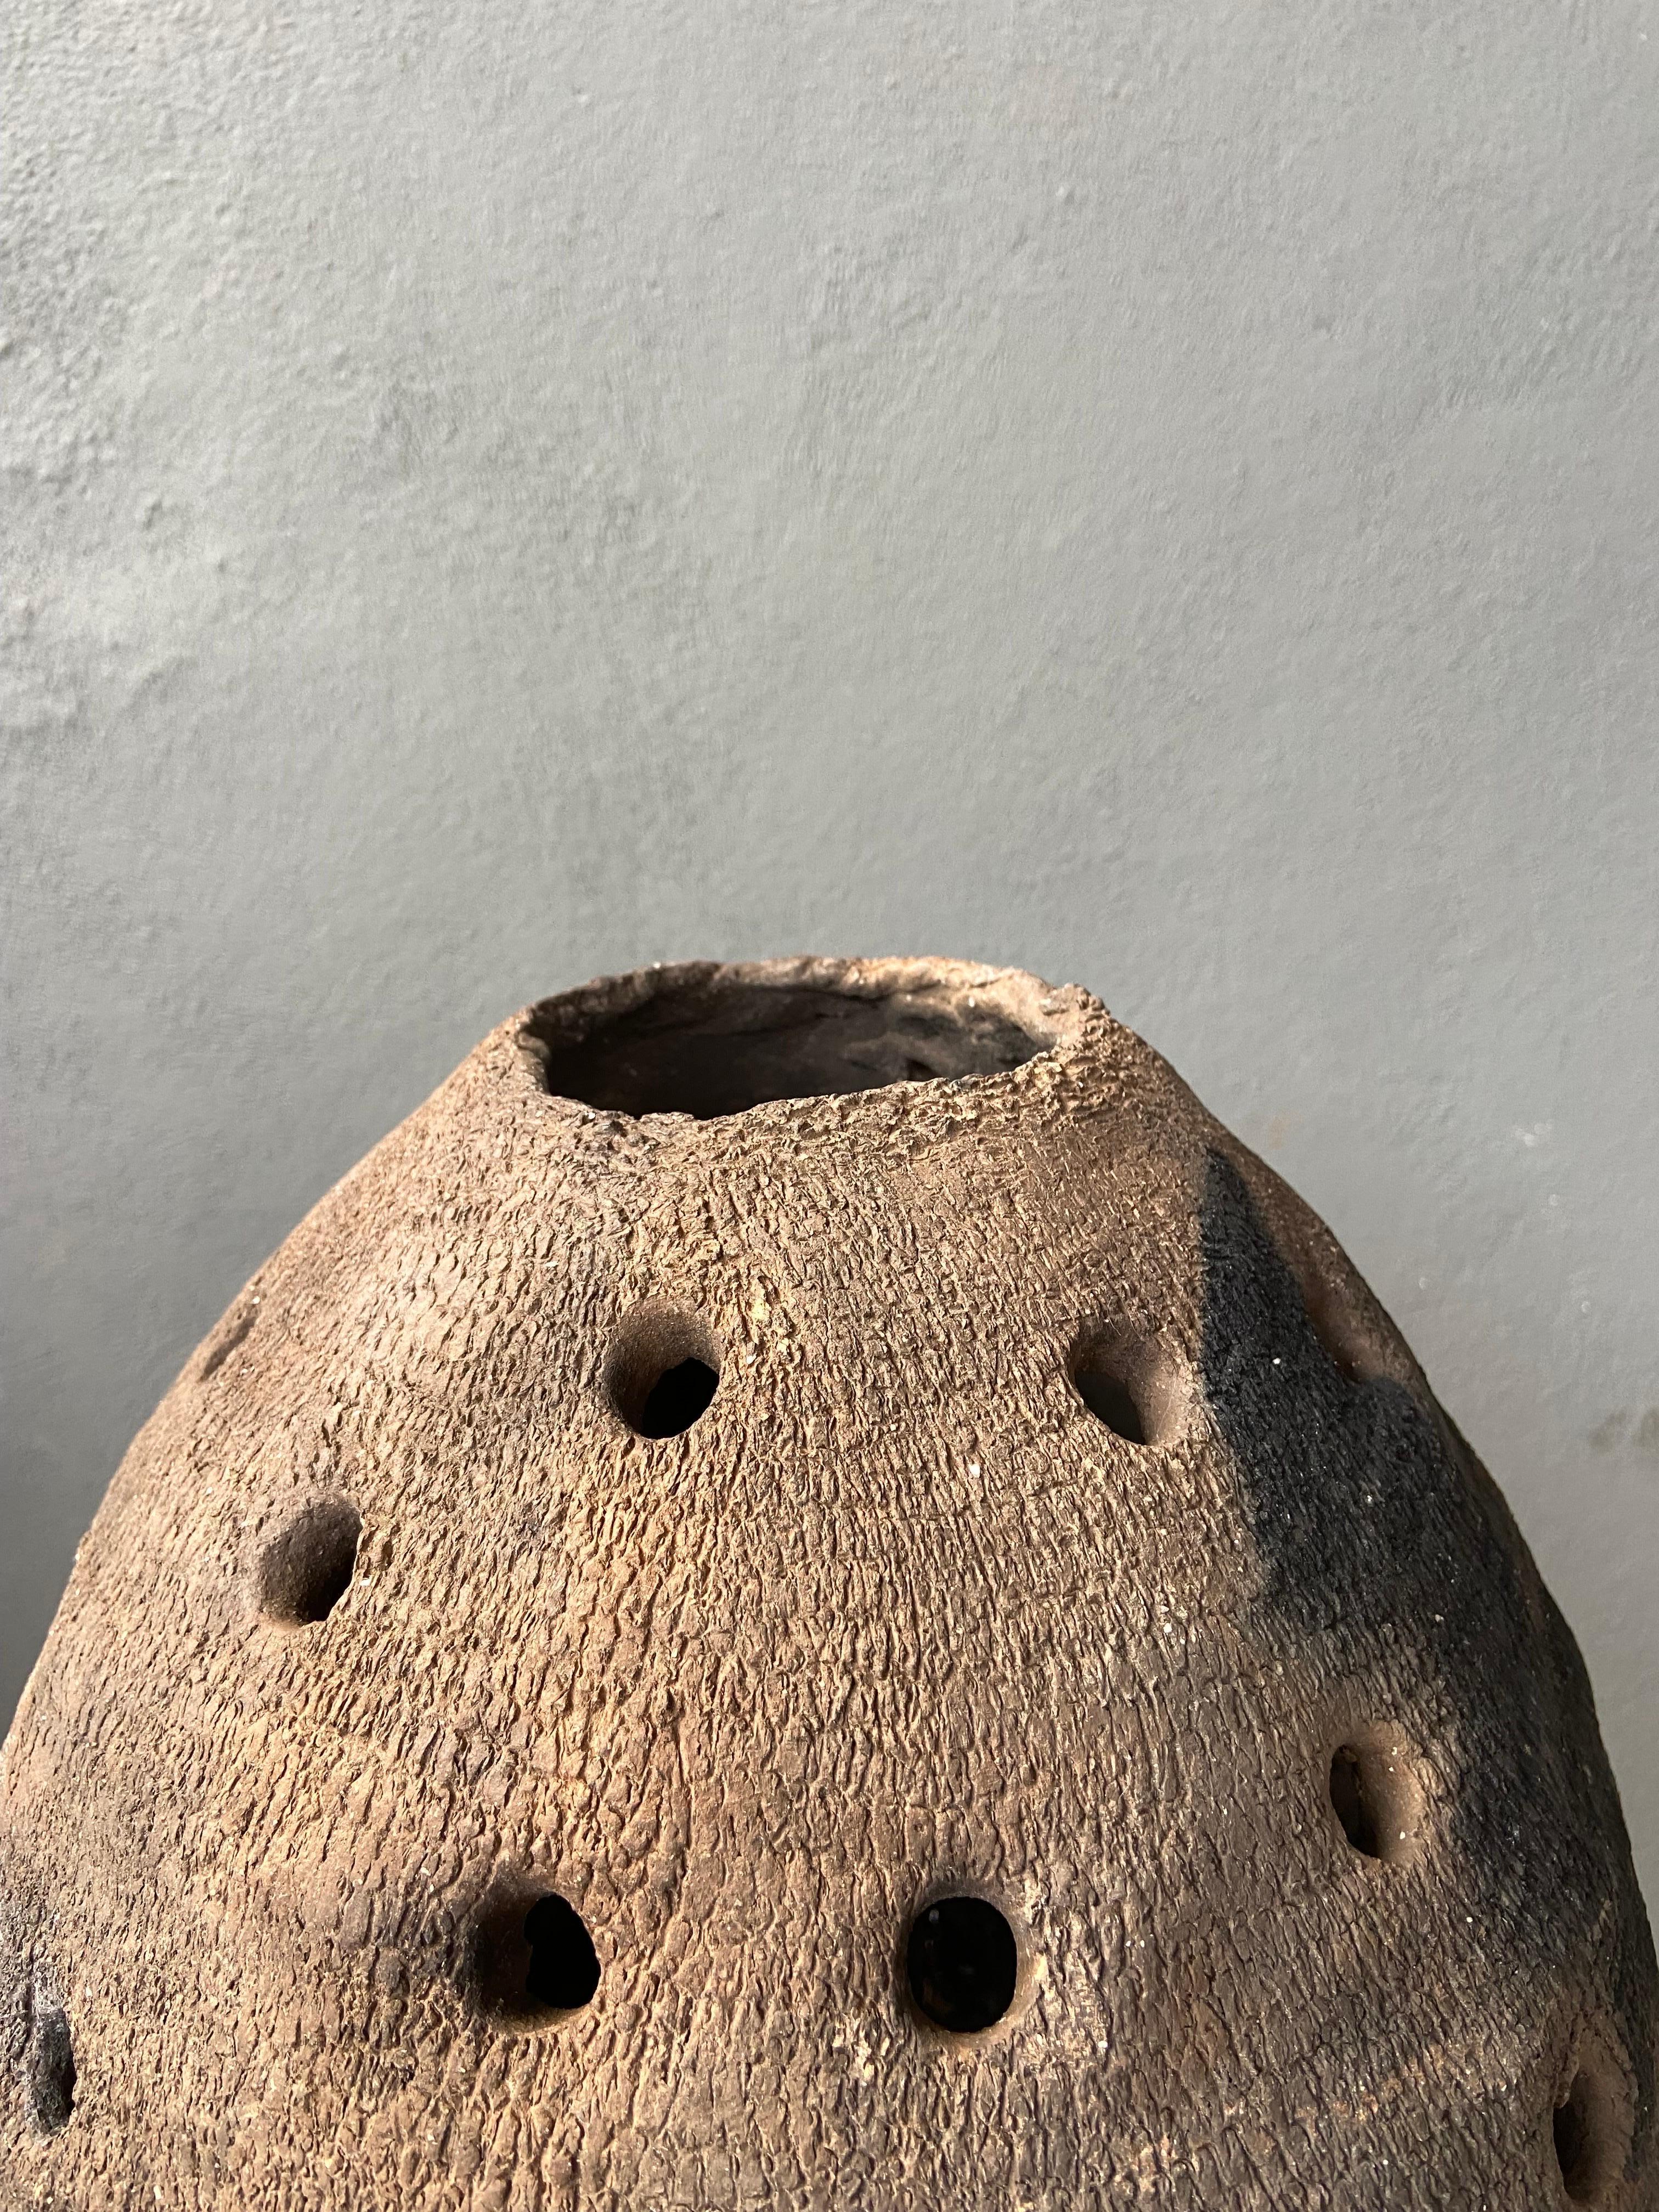 Primitive Beehive Terracotta Heater From Mexico, Circa 1950´s 4